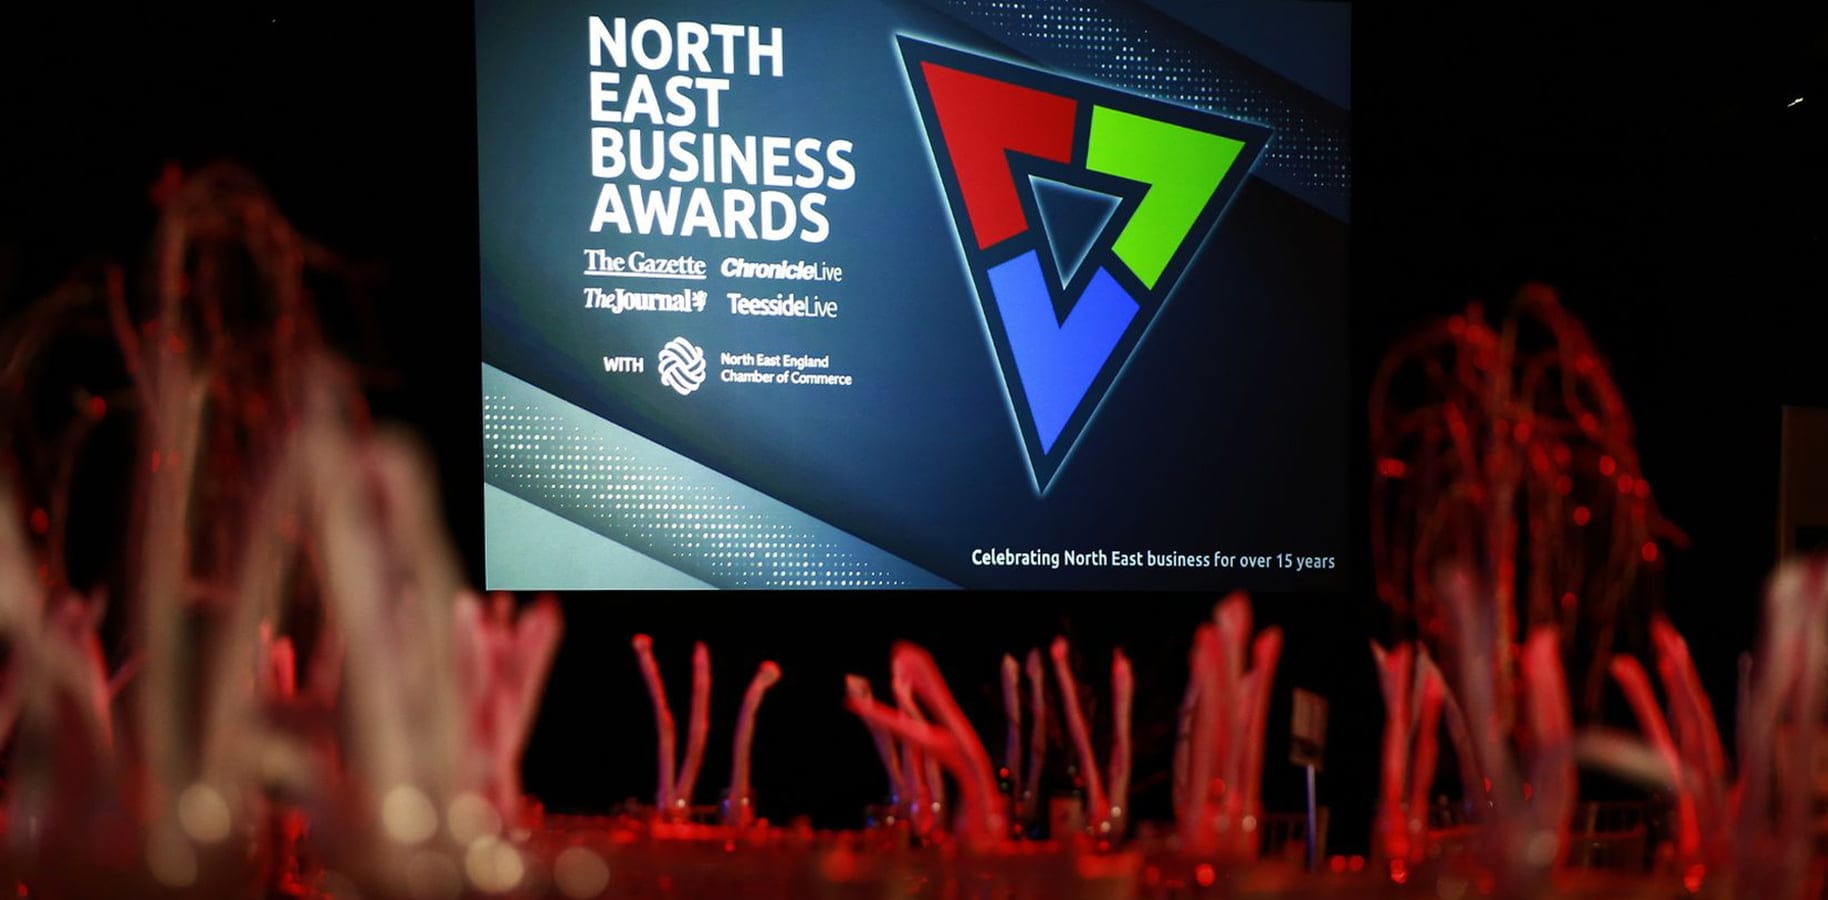 North East Business Awards logo shown on screen